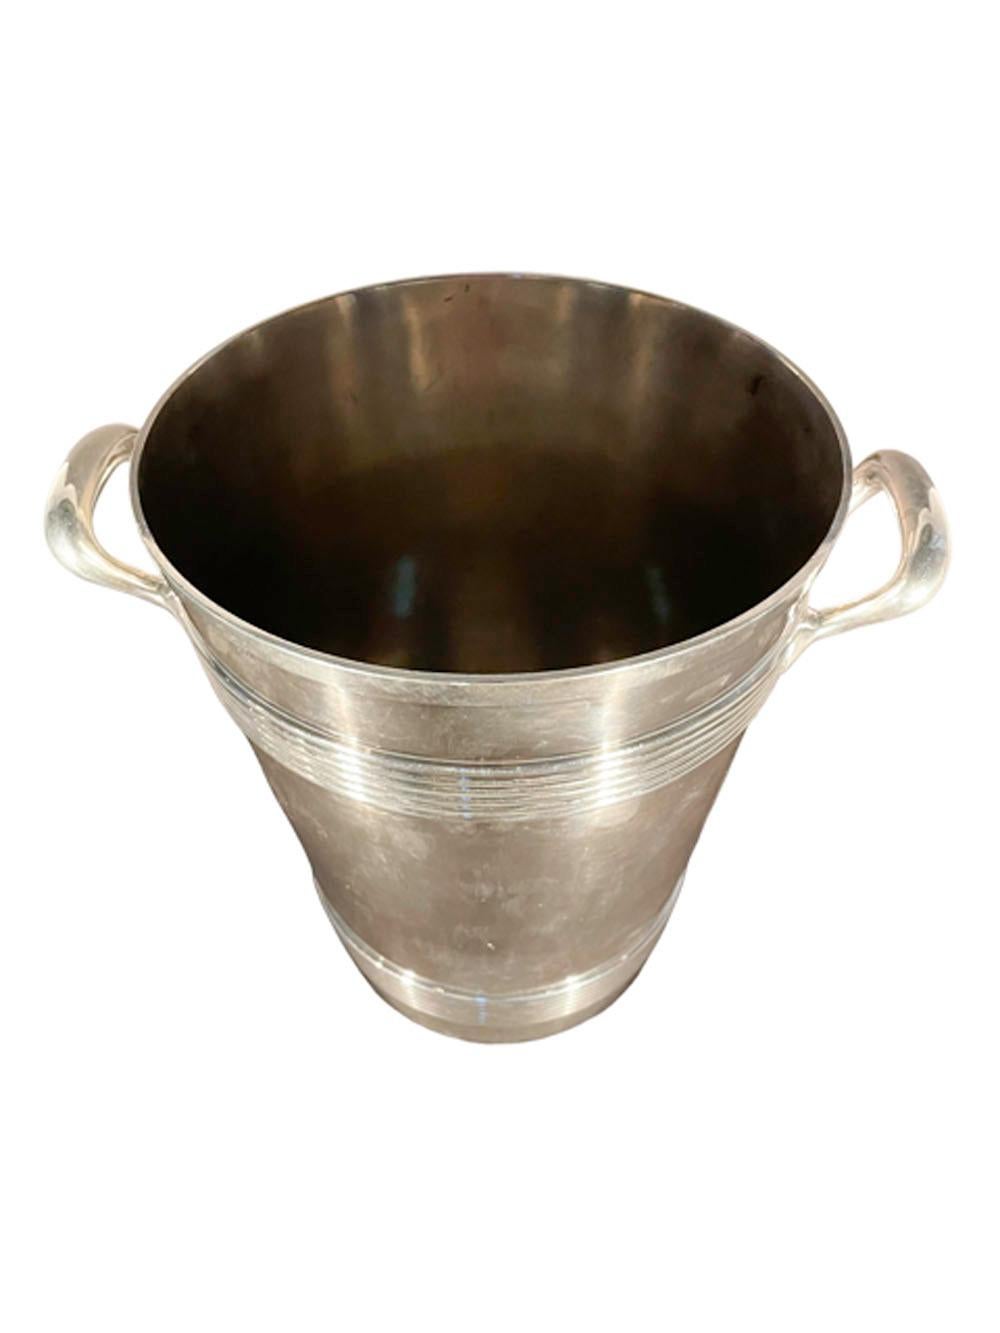 Art Deco silver plate champagne / wine bucket of tapered form by Wilcox S.P. Co. having 2 reeded bands and fixed loop handles.